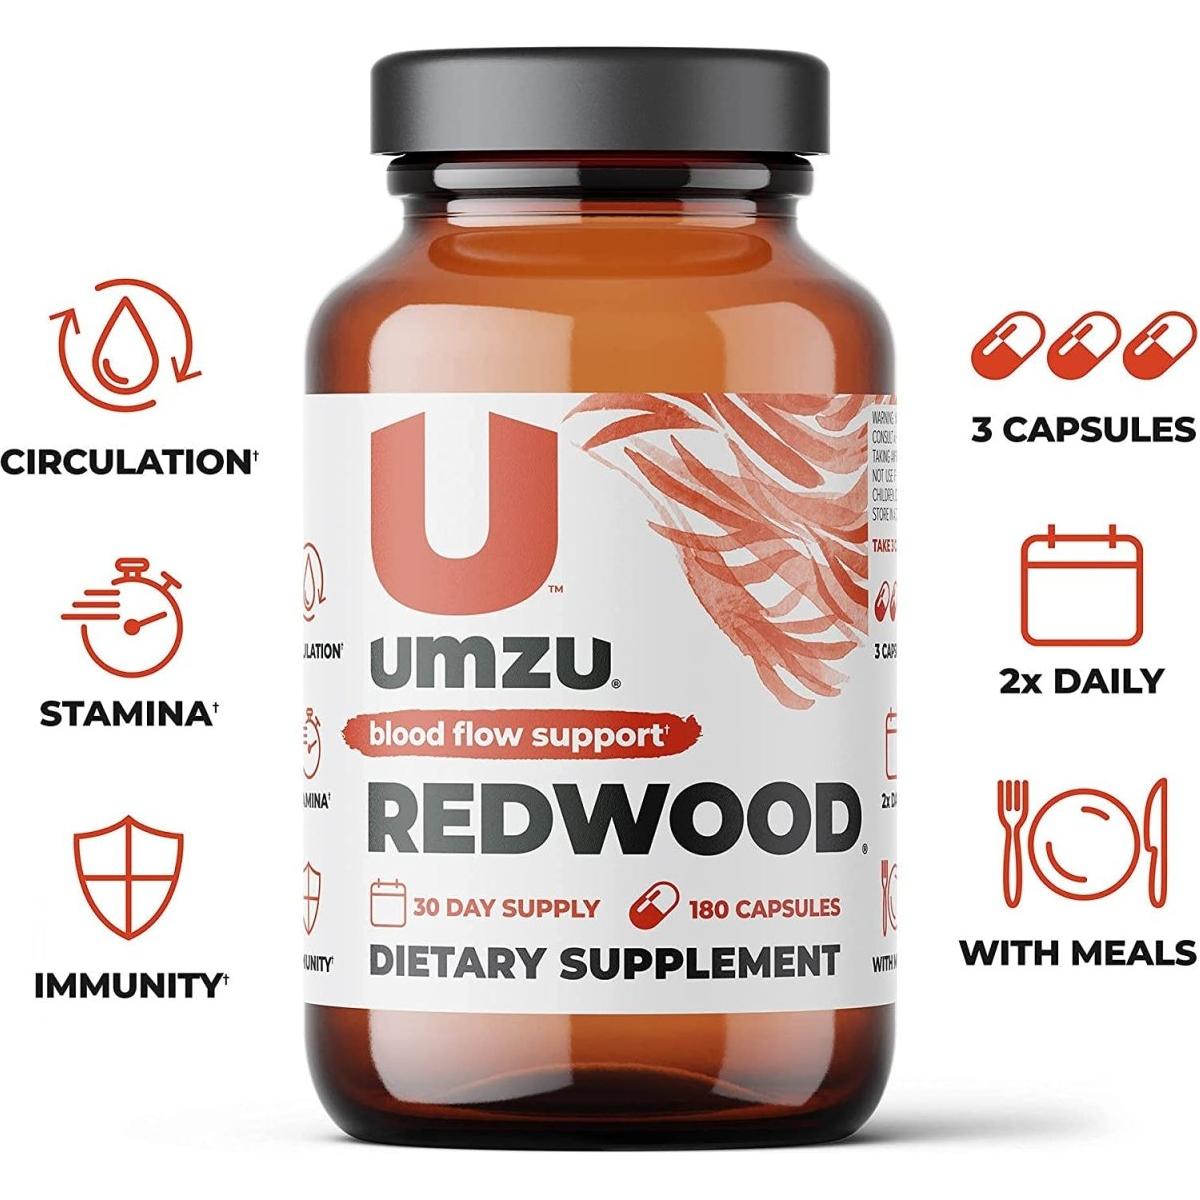 REDWOOD Nitric Oxide & Circulatory Support - Supplement with Vitamin C, Garlic & Horse Chestnut - for Well-Being - 30 Day Supply - 180 Capsules - Glam Global UK